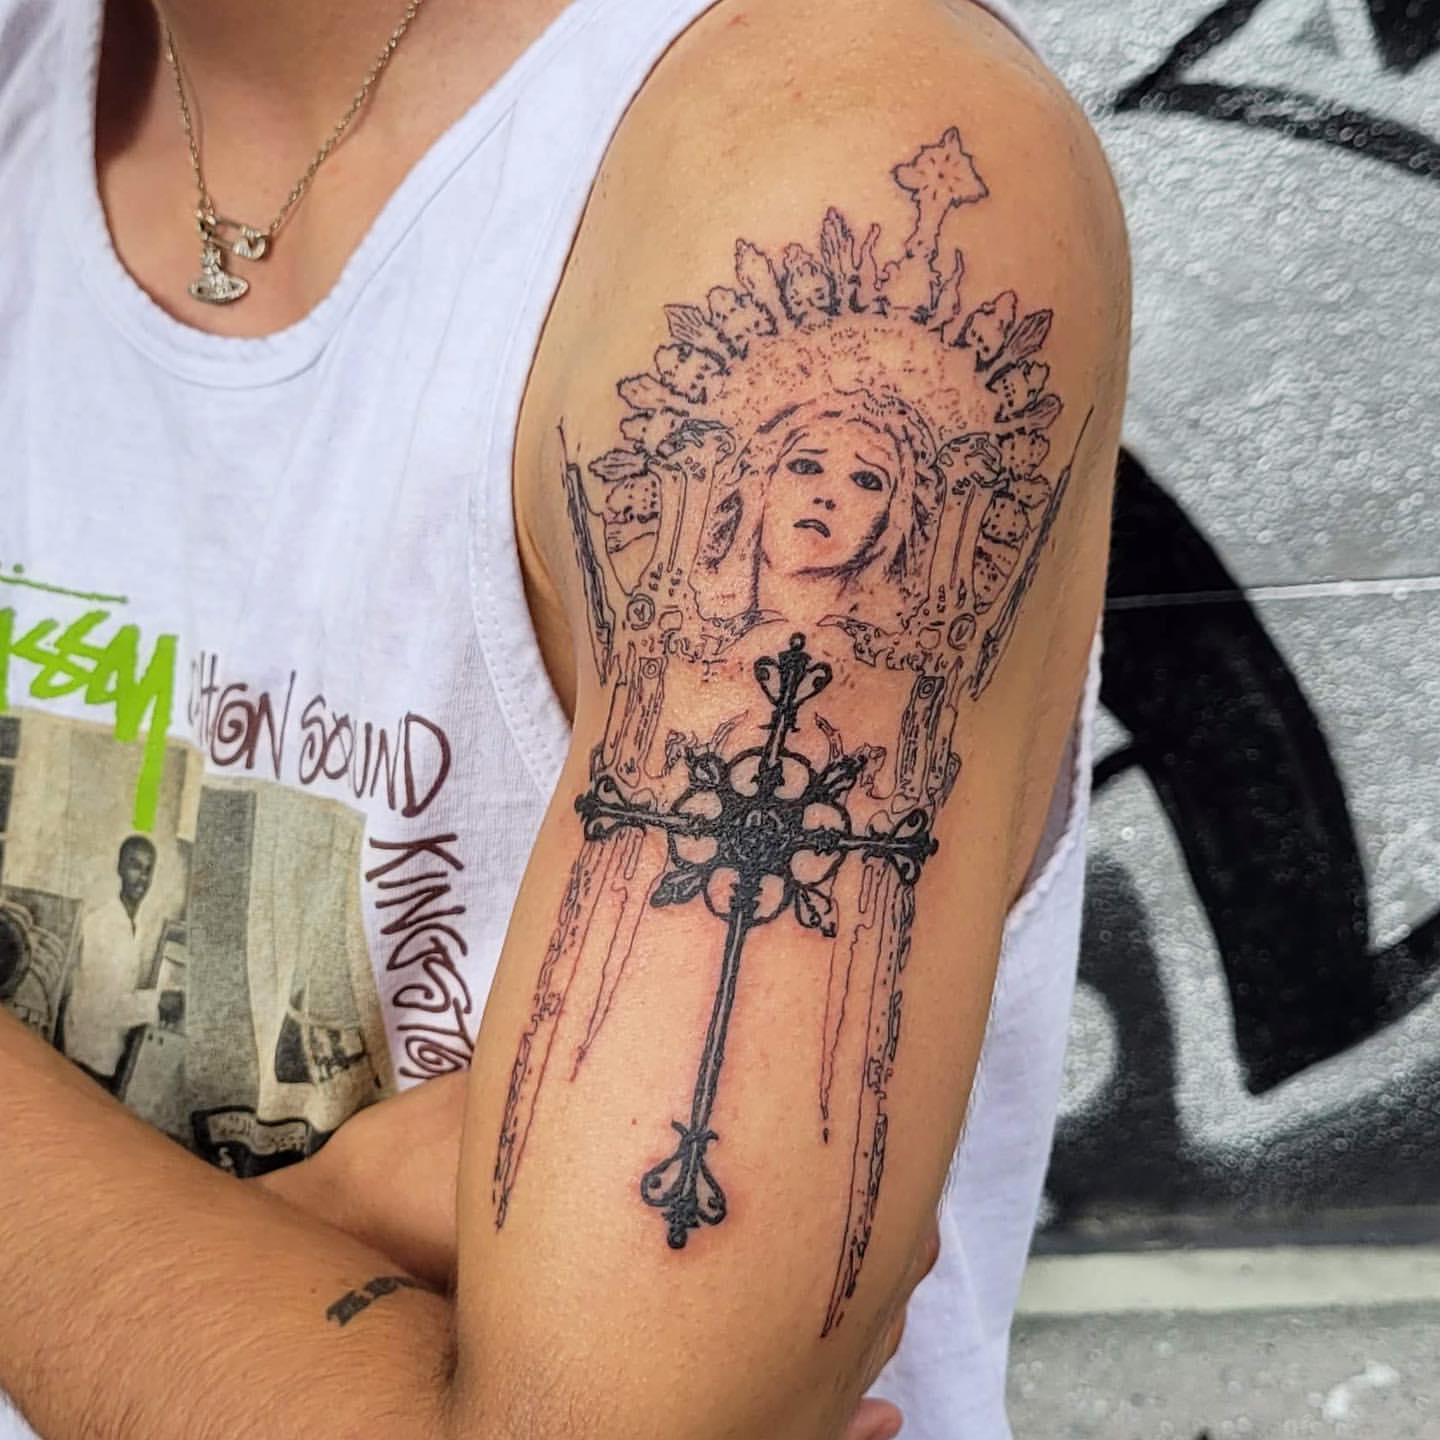 Can Catholics Have Tattoos?. A Reflection | by A Catholic Aspergian | Medium